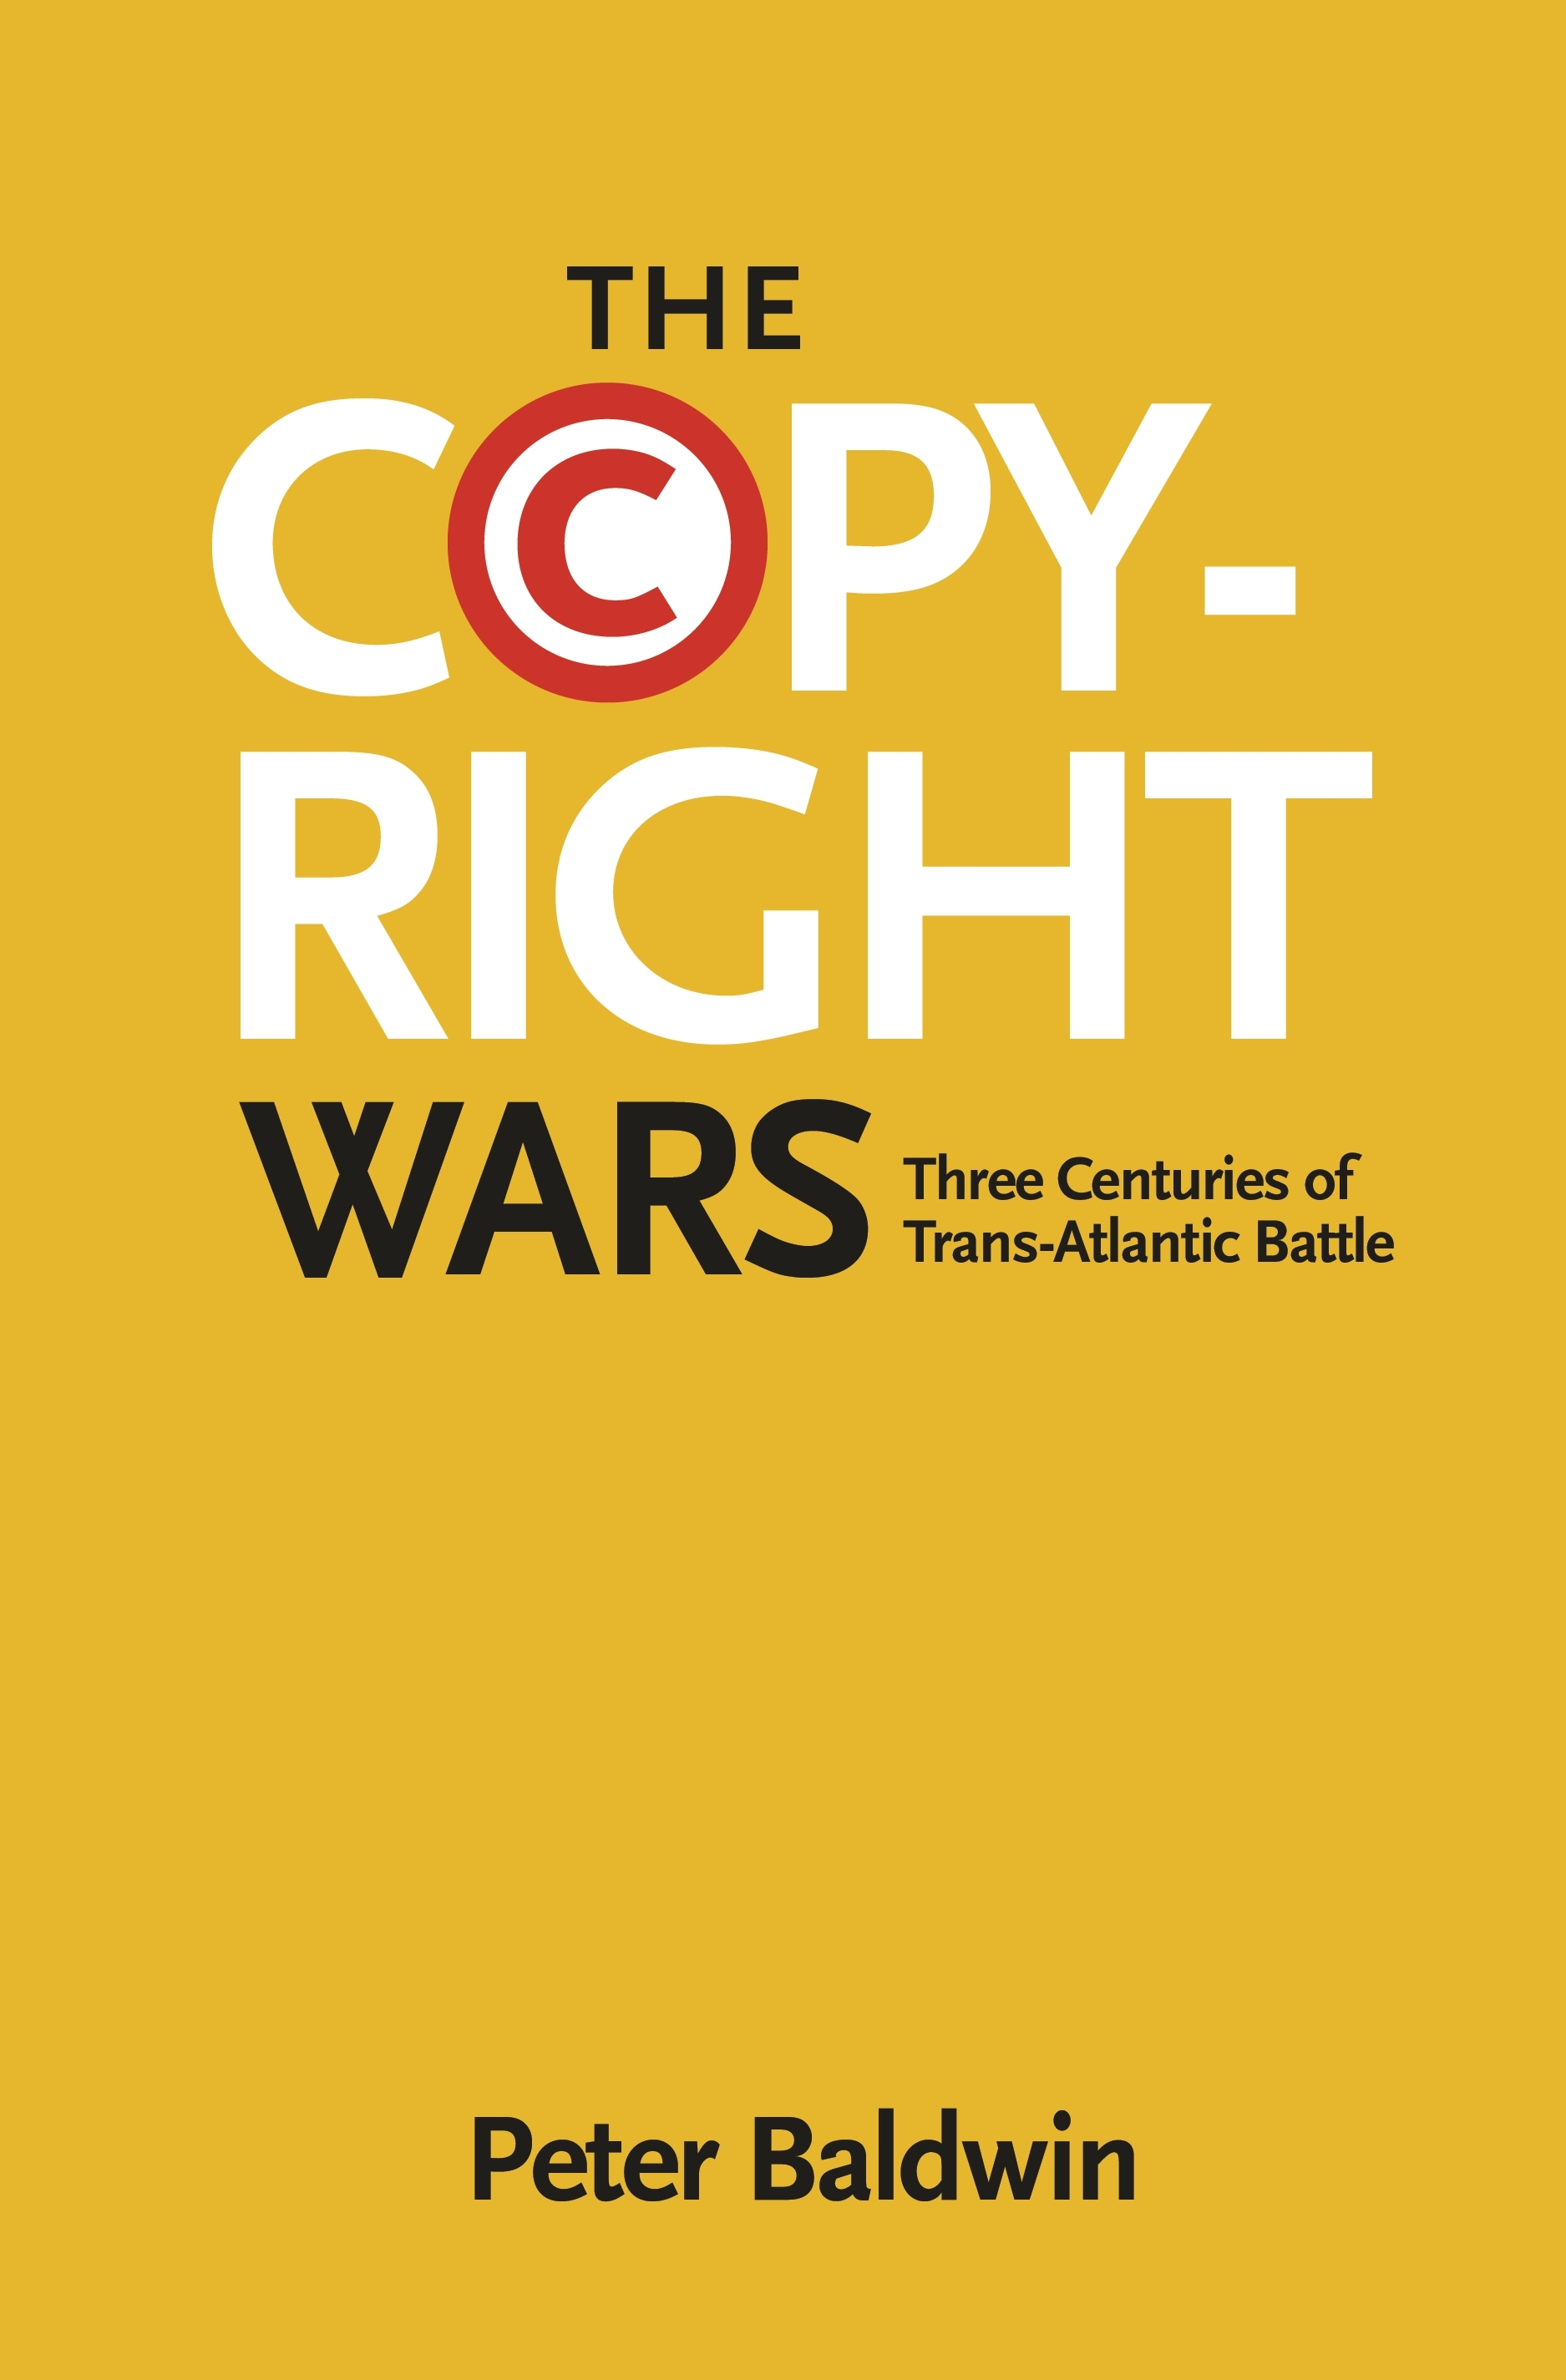 The copy-right wars peter baldwin book cover